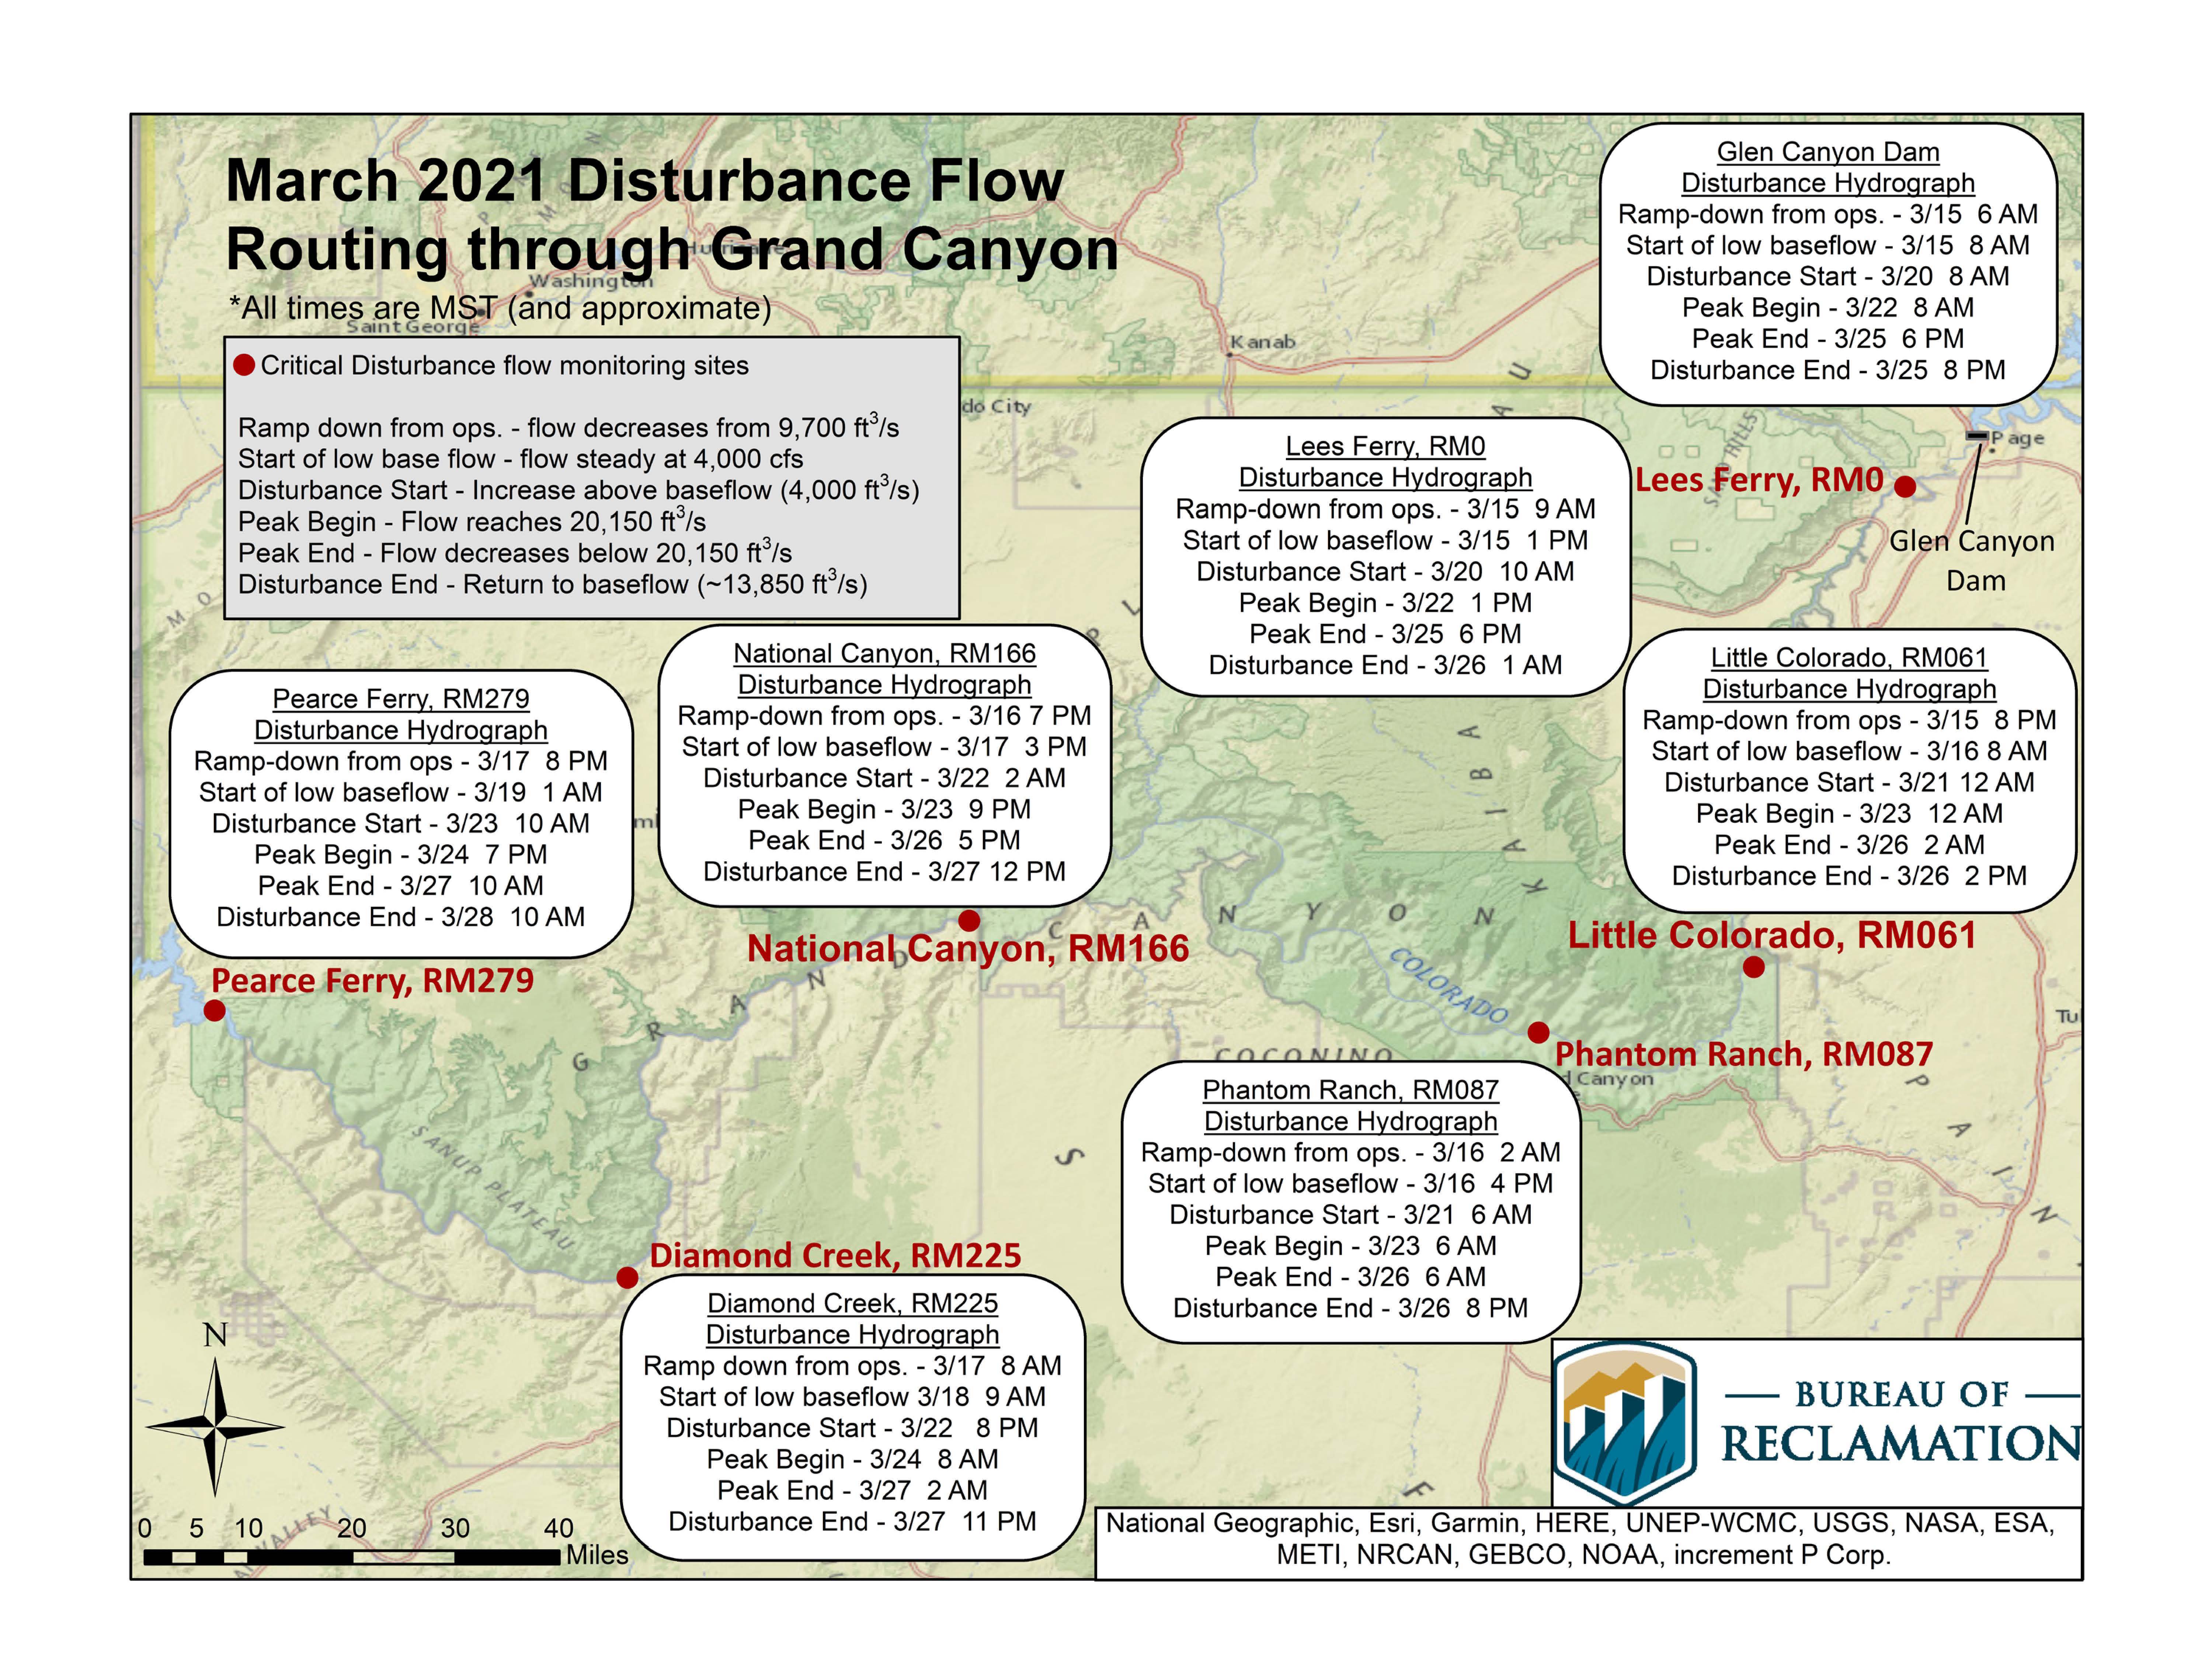 A map of the Colorado River between Glen Canyon Dam and Lake Mead is shown with information on when the spring disturbance flow will arrive at different river locations.